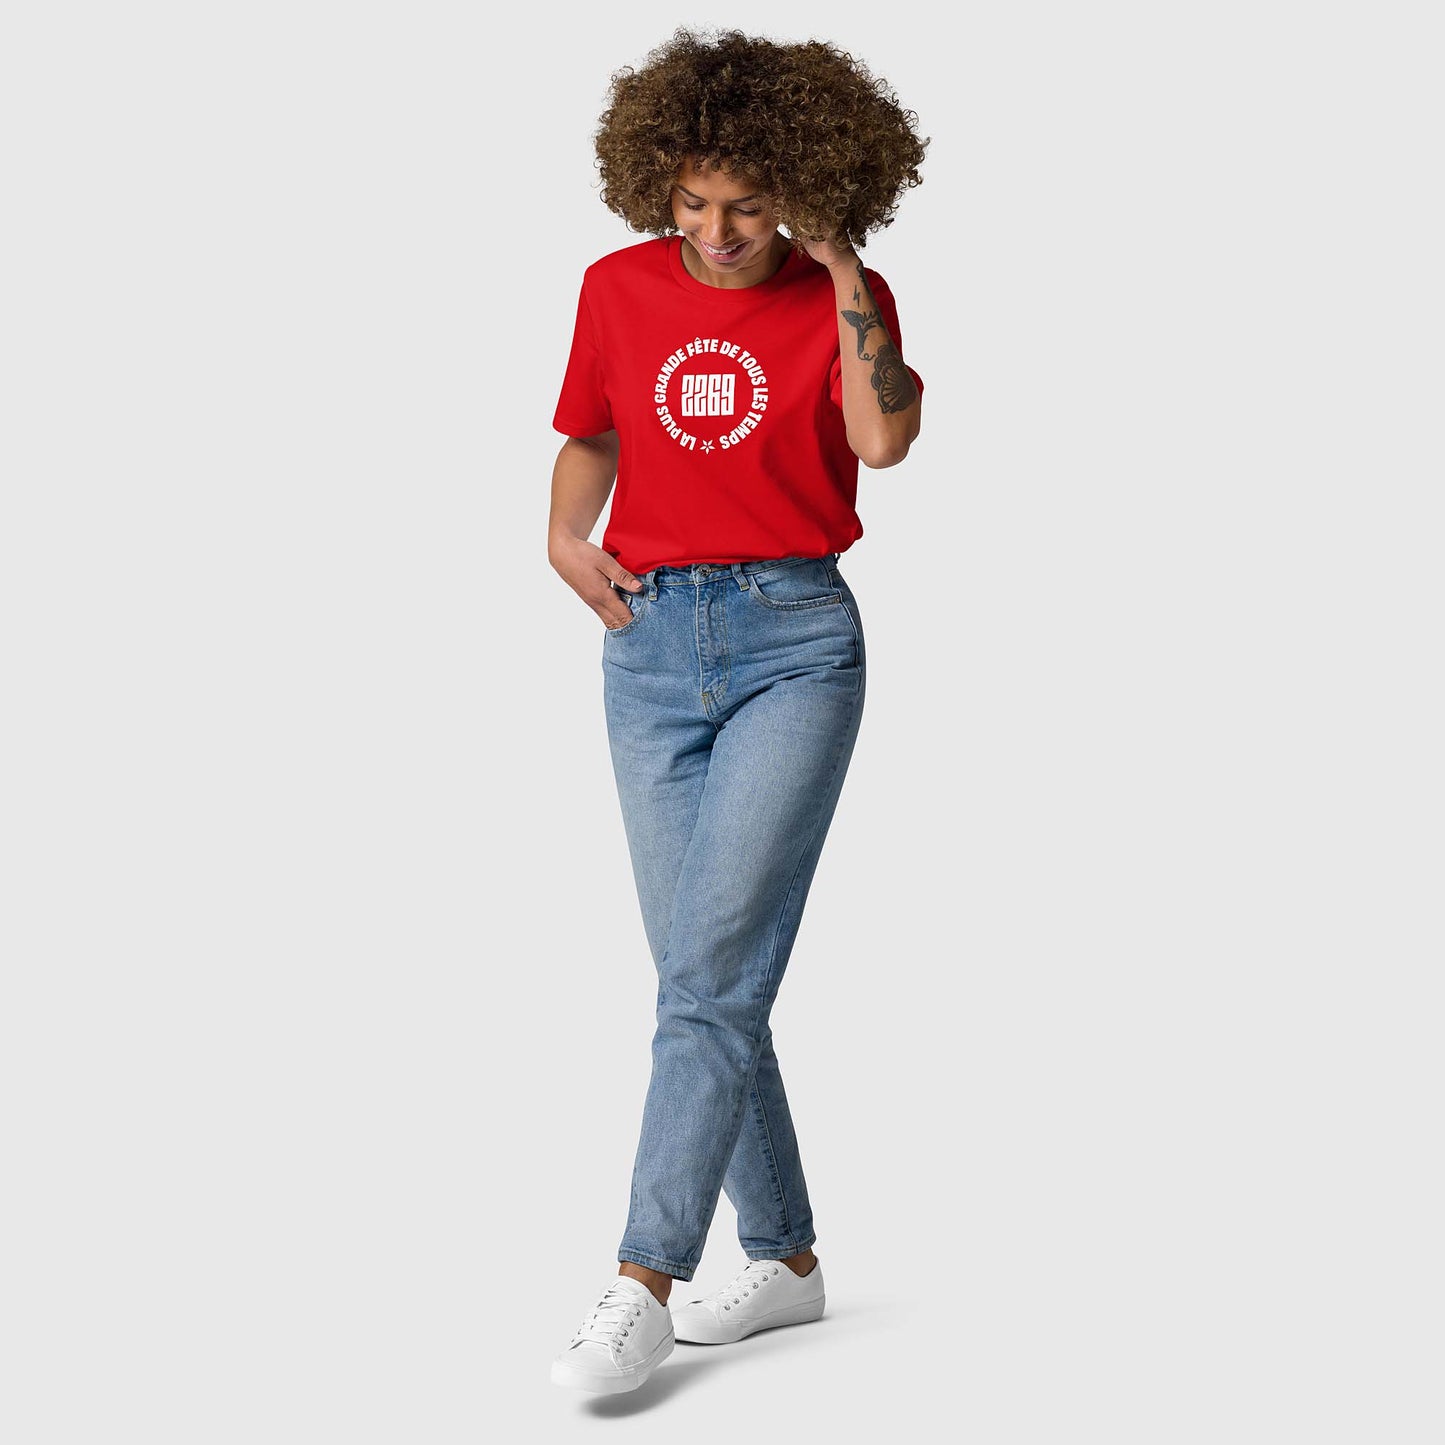 Unisex red organic cotton t-shirt with French 2269 party circle